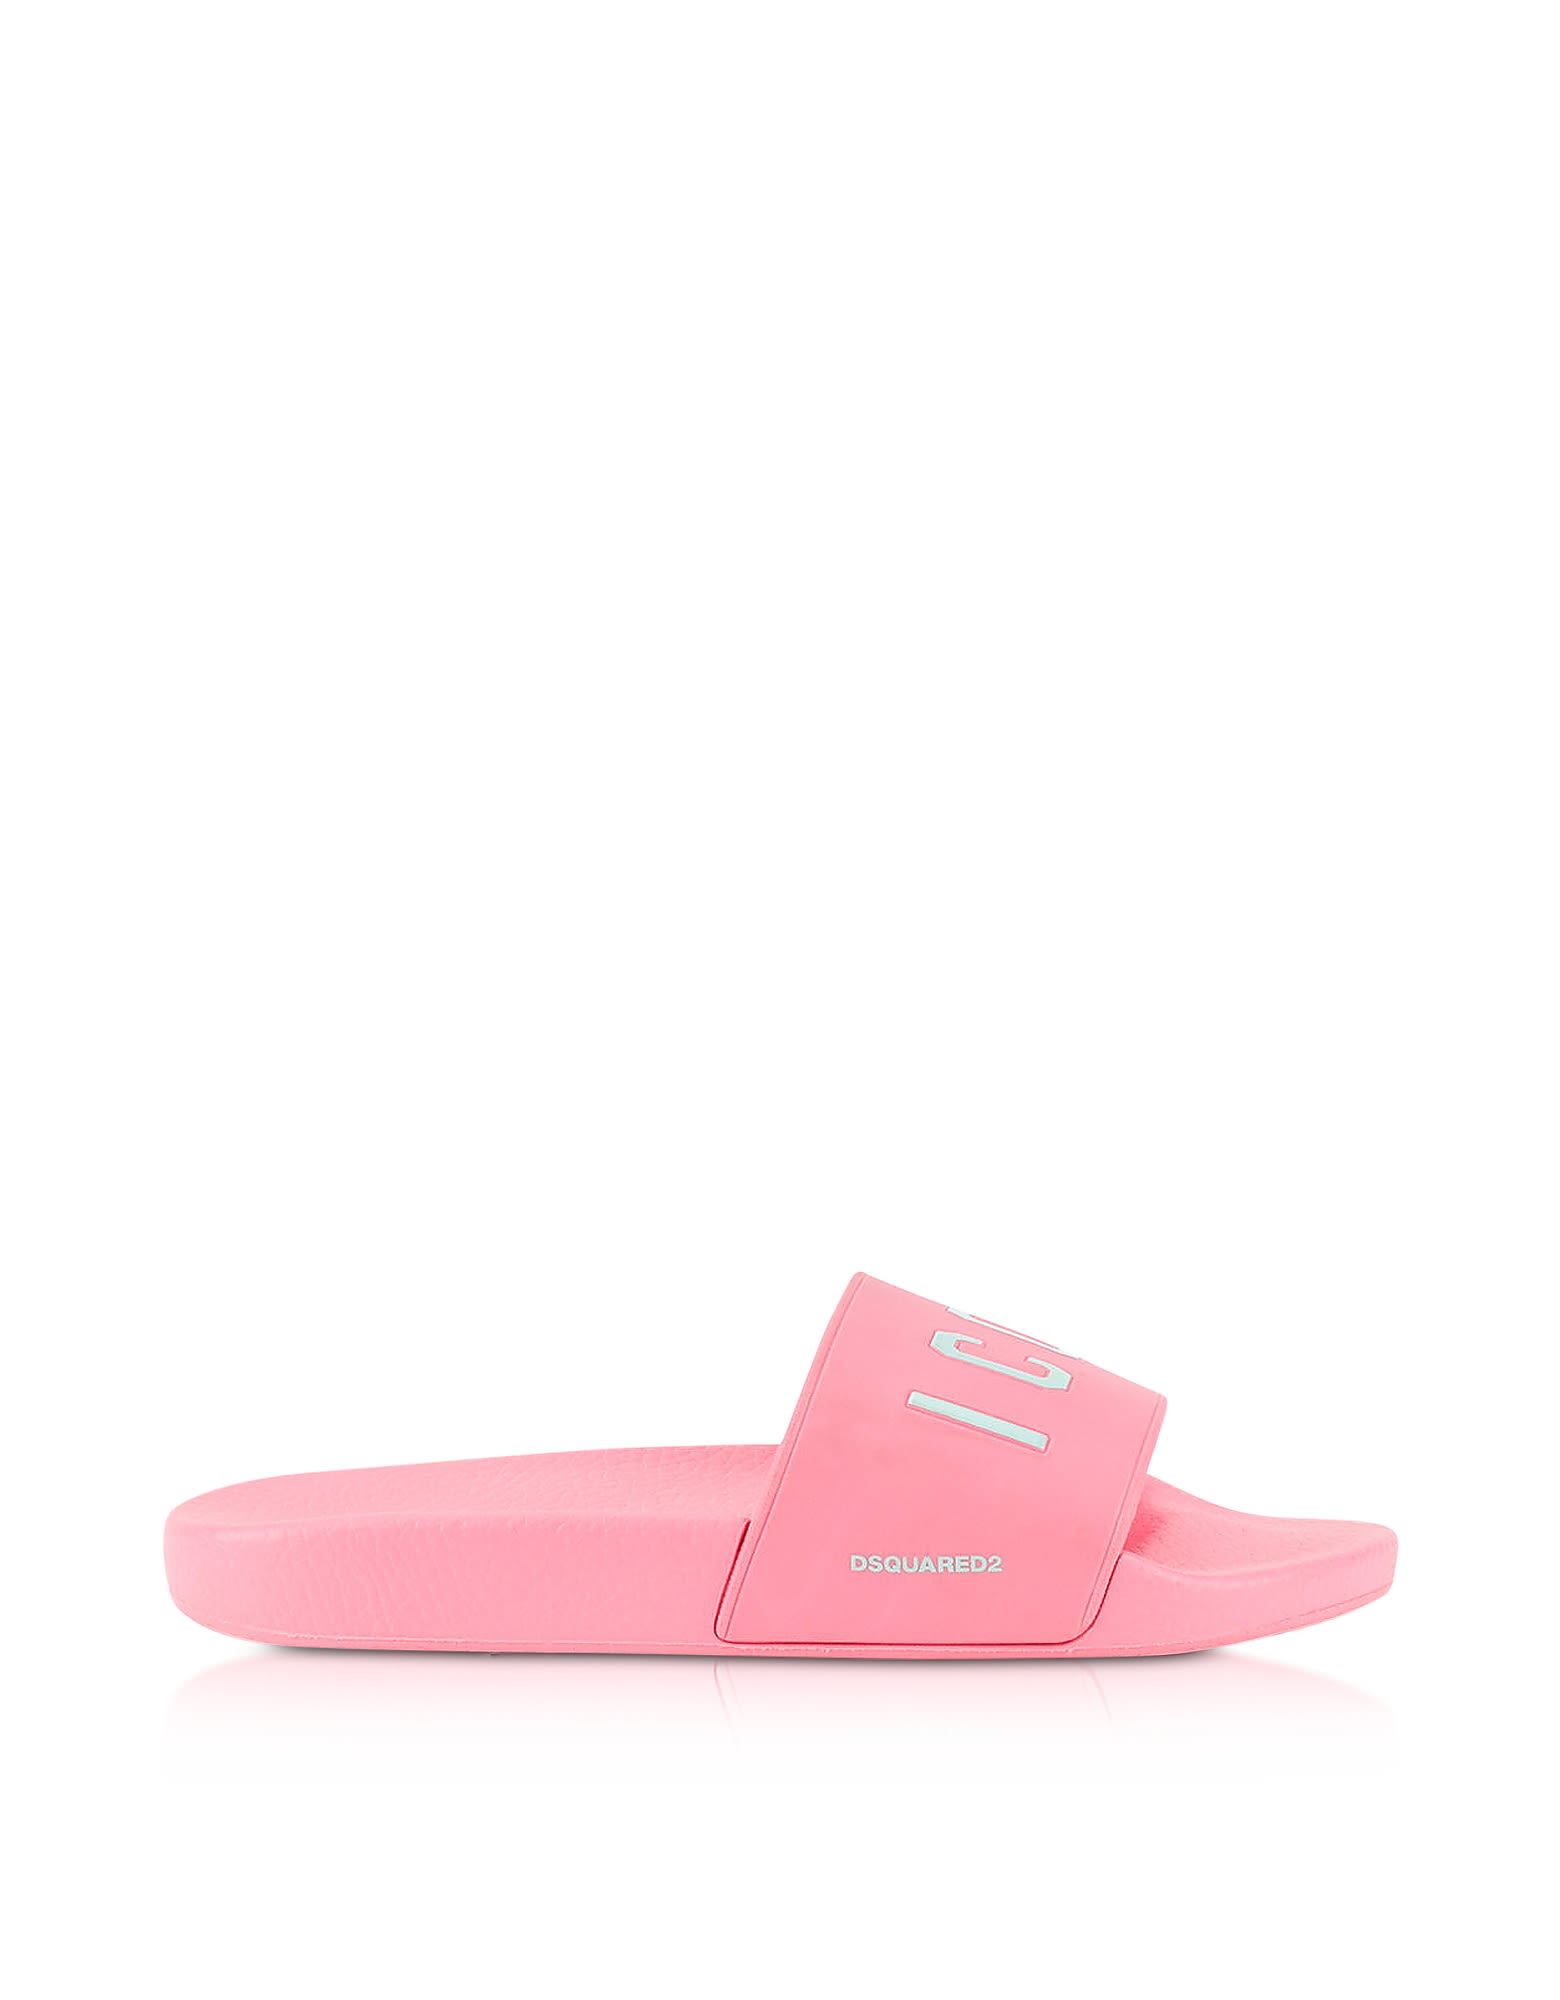 DSQUARED2 ICON PINK RUBBER SLIDE SANDALS,10591001